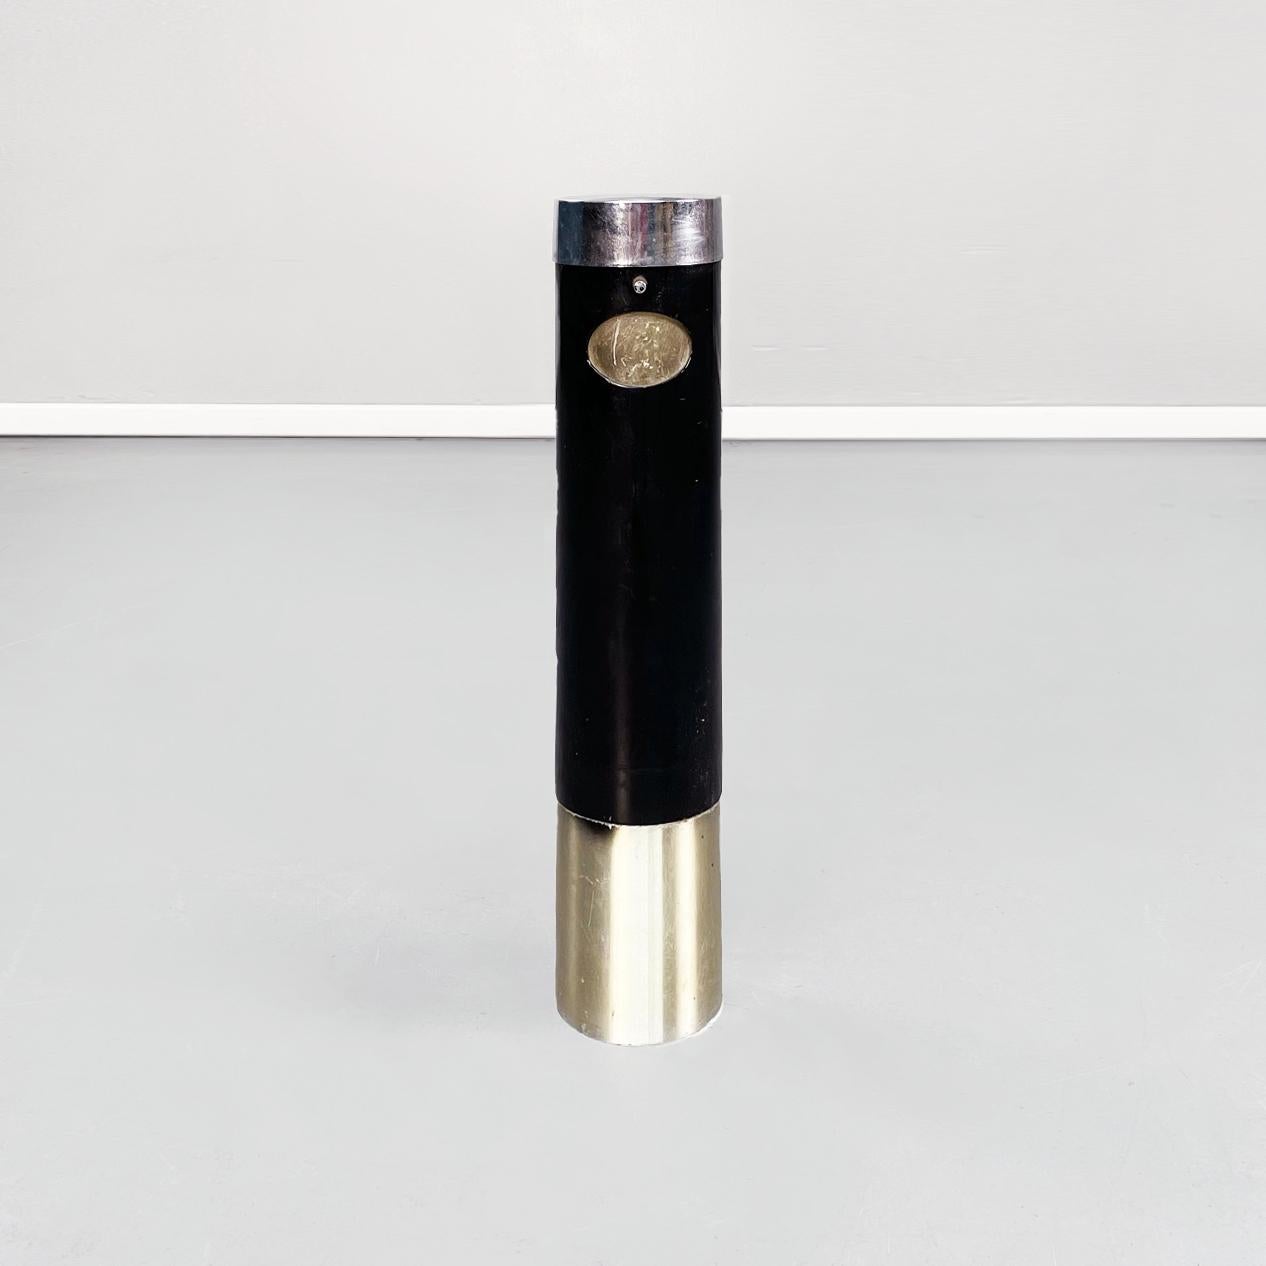 Italian mid-century golden and black metal cylindrical-shaped floor ashtray, 1960s
Cylindrical-shaped floor ashtray in metal and black painted metal. The upper part consists of a small grate for extinguishing and storing cigarettes. In the central